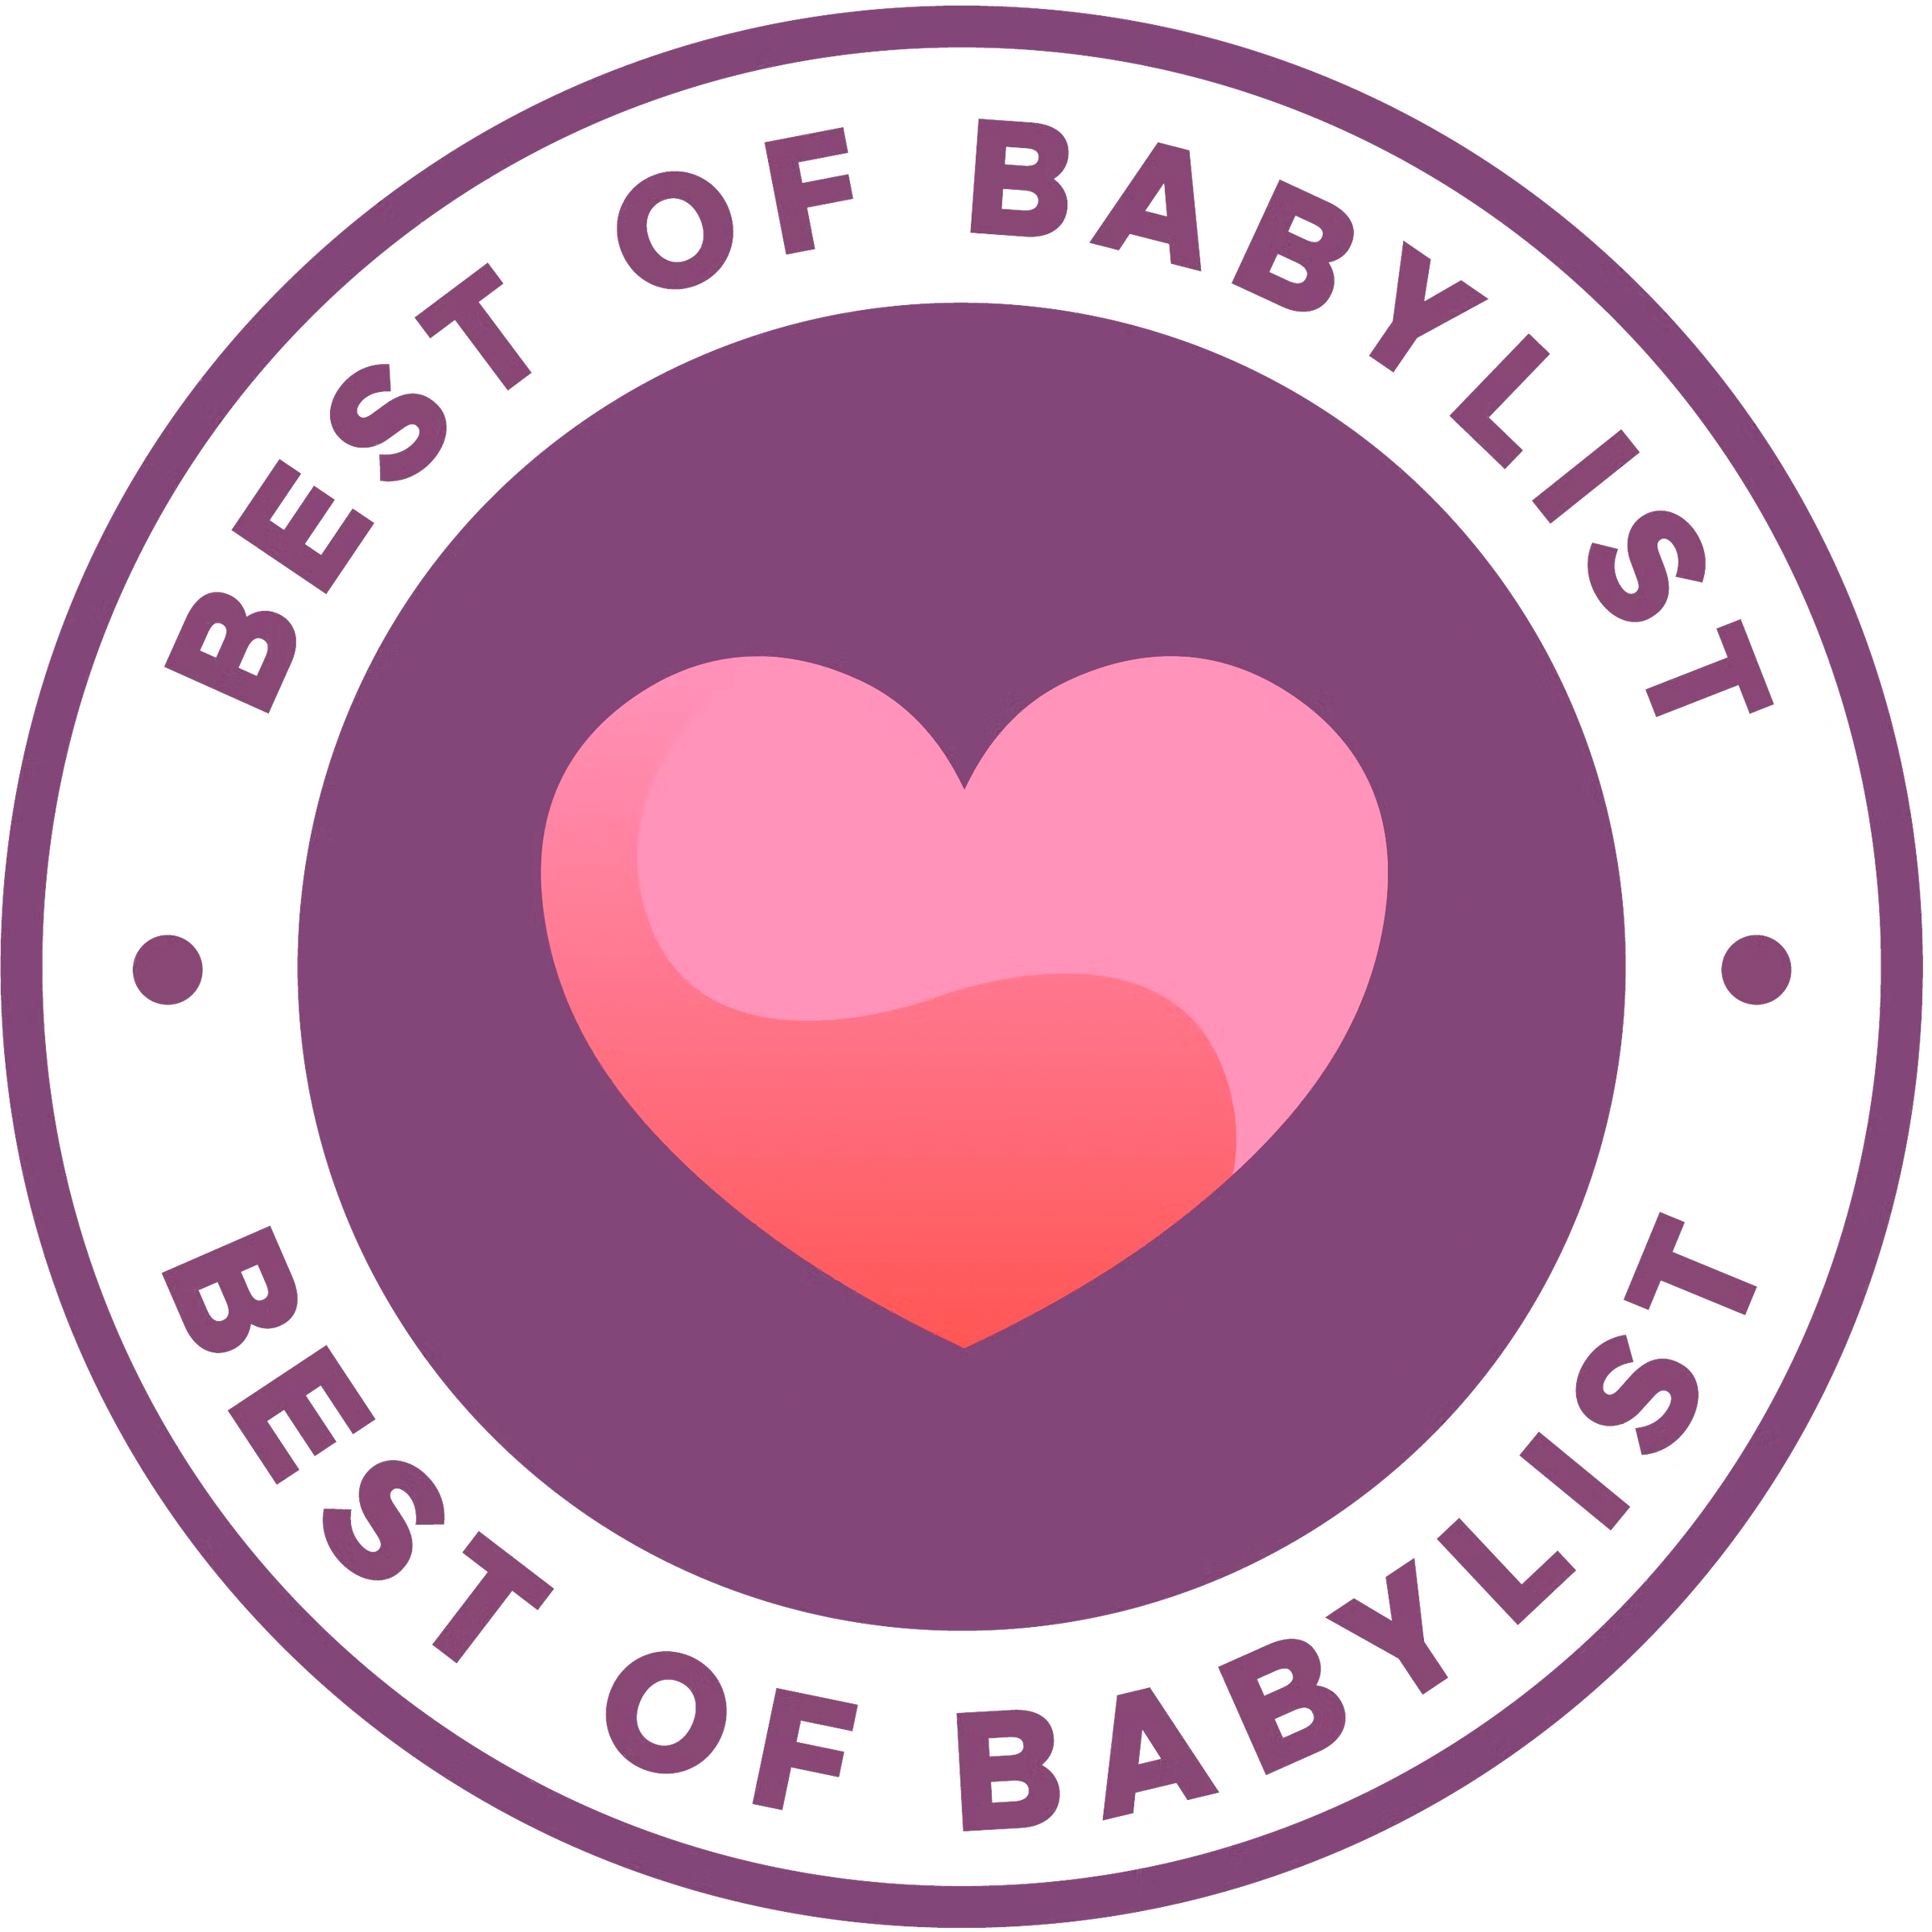 The Best of Babylist Award logo which features a heart in the center of a purple circle.